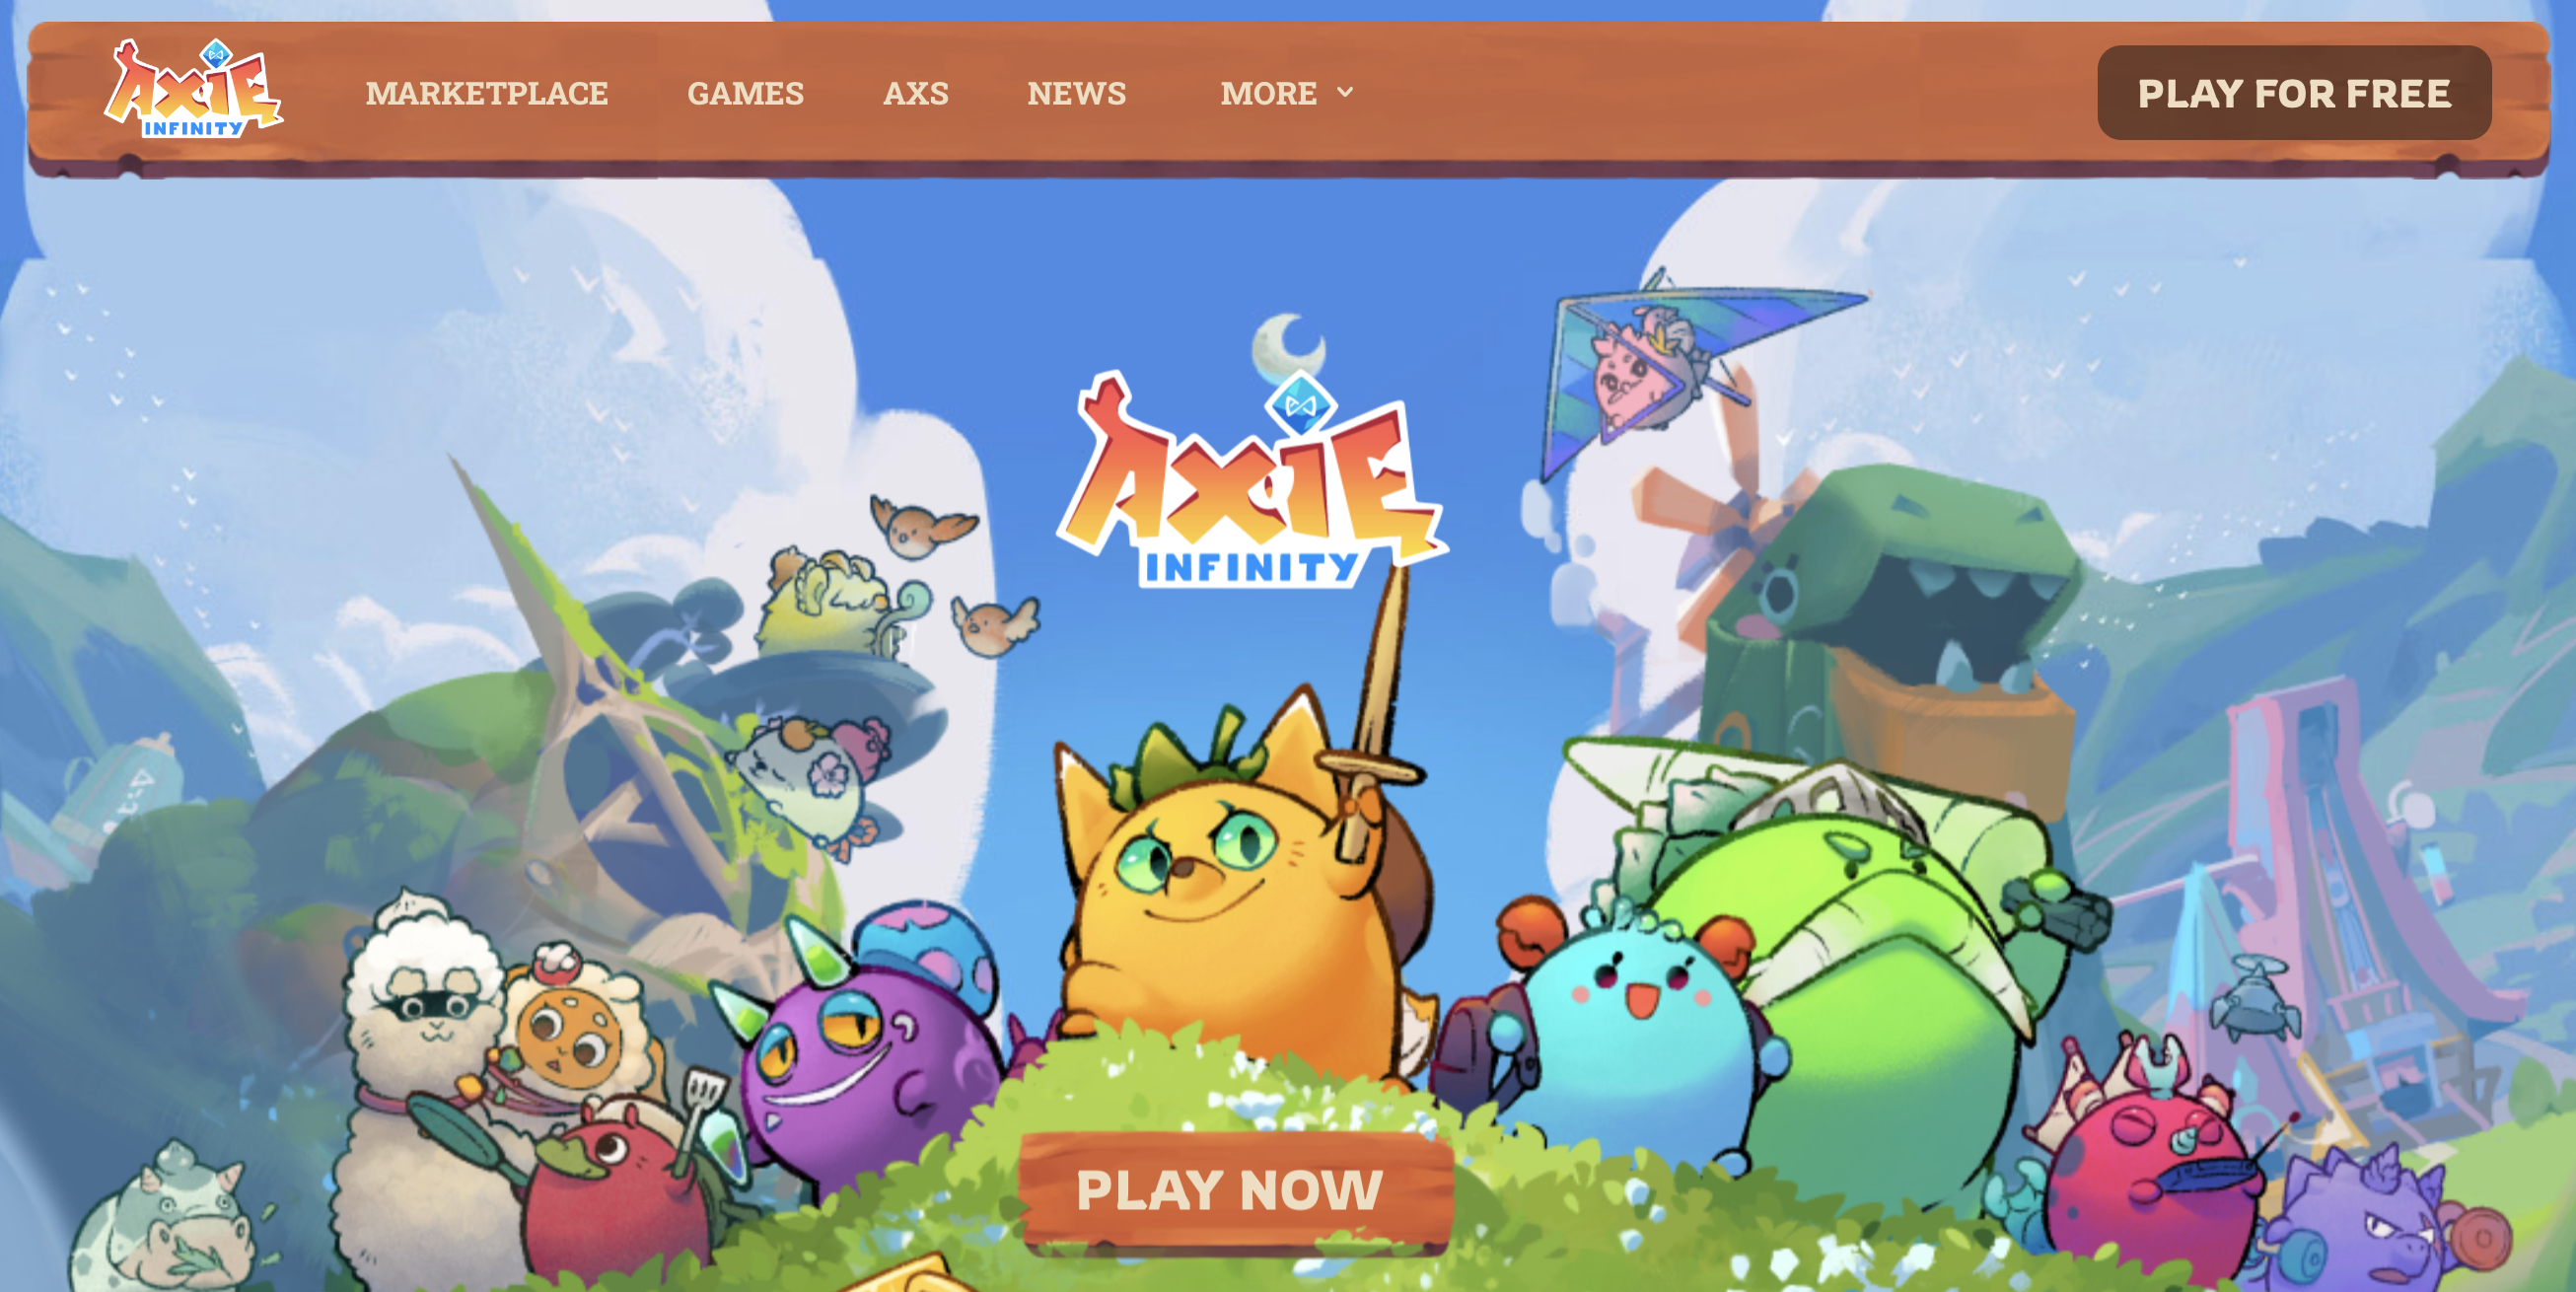 play to earn games - axie infinity